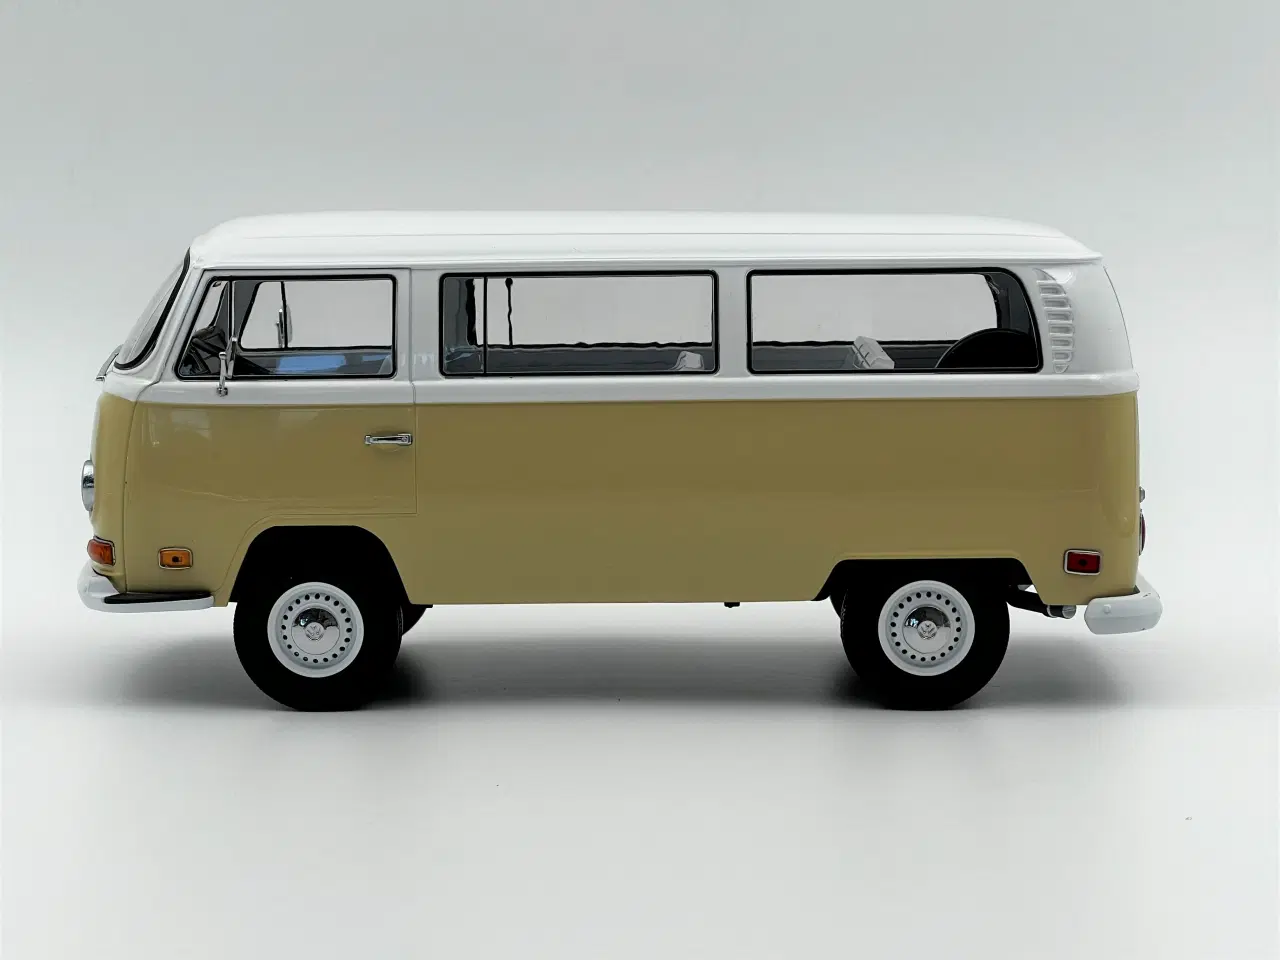 Billede 2 - 1971 VW T2a "Early Bay" Bus Limited Edition 1:18